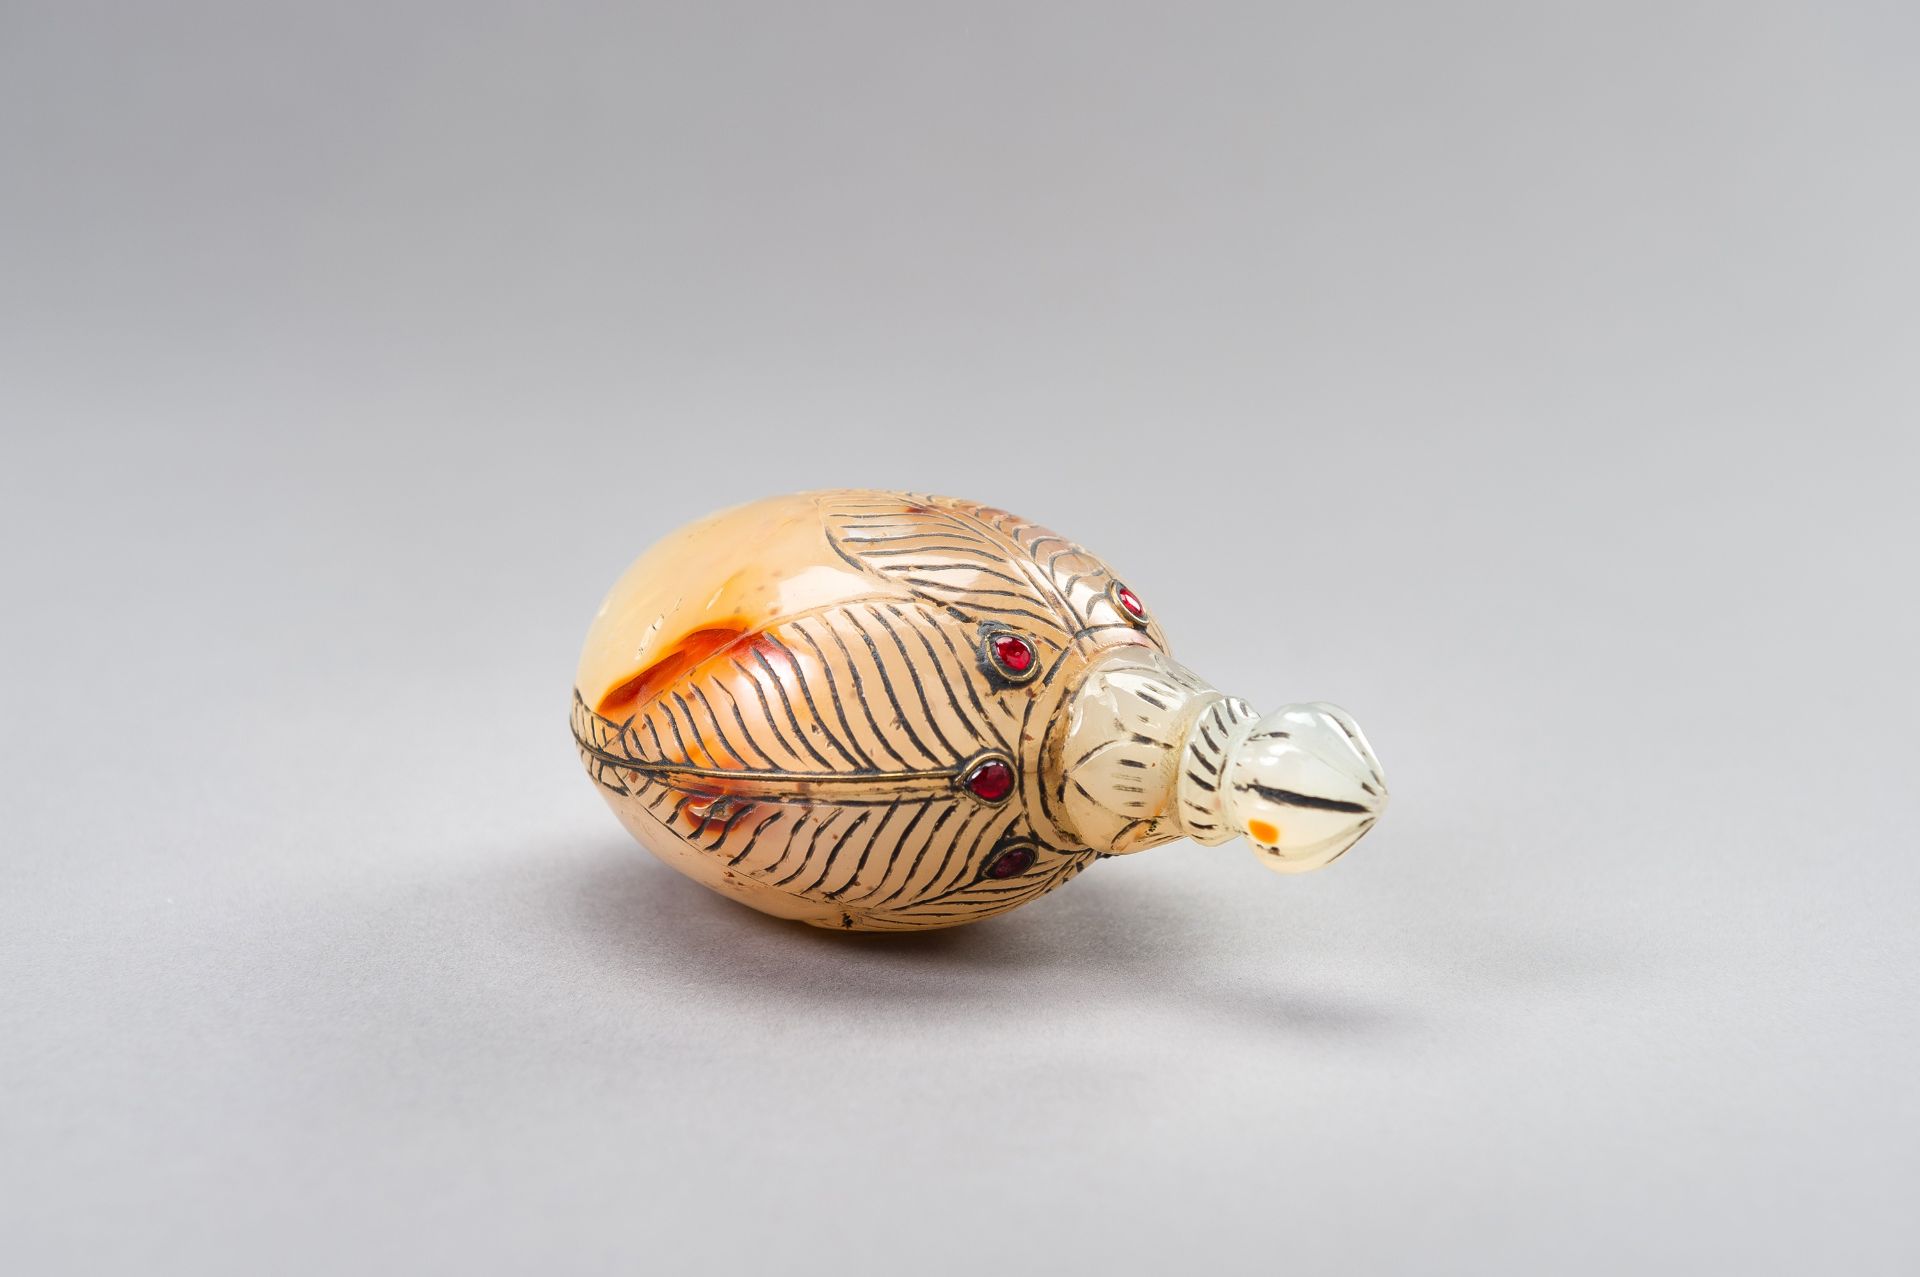 A MUGHAL-STYLE AGATE PERFUME BOTTLE - Image 7 of 12